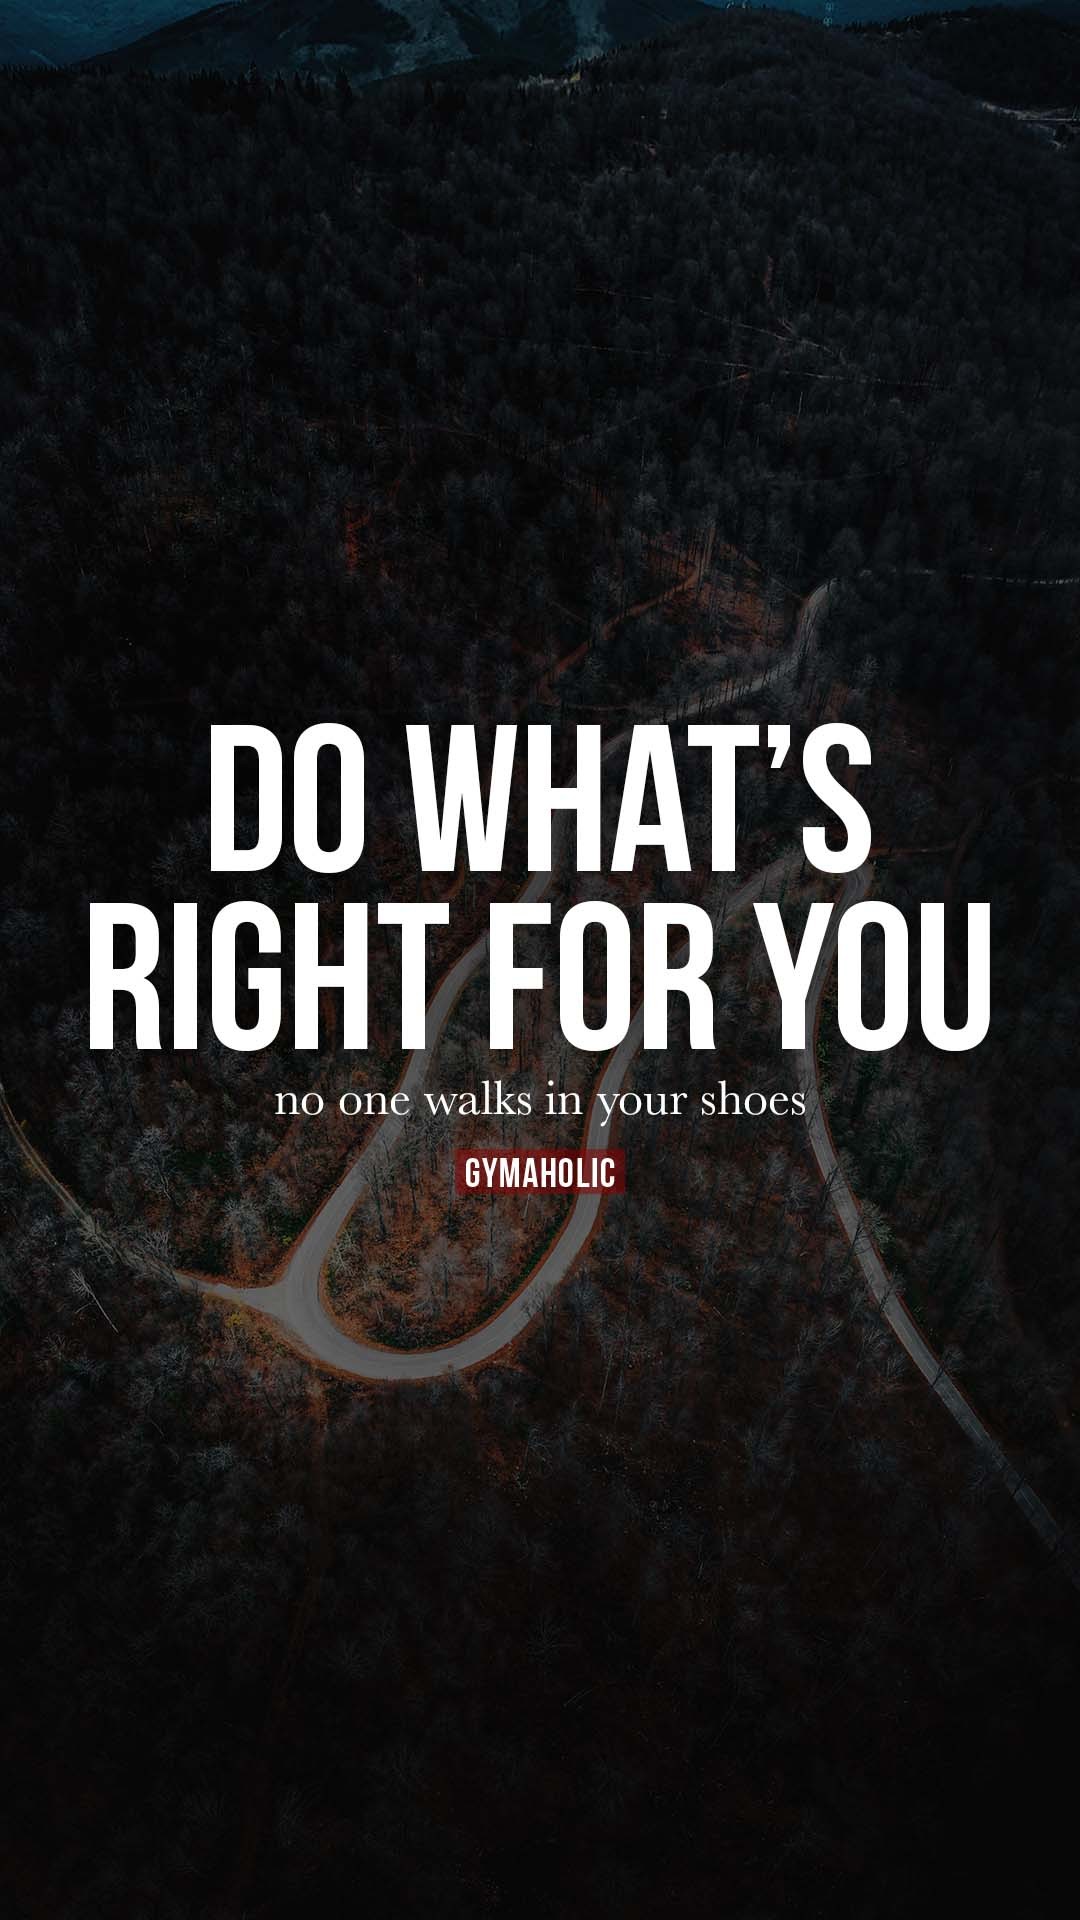 Do what’s right for you